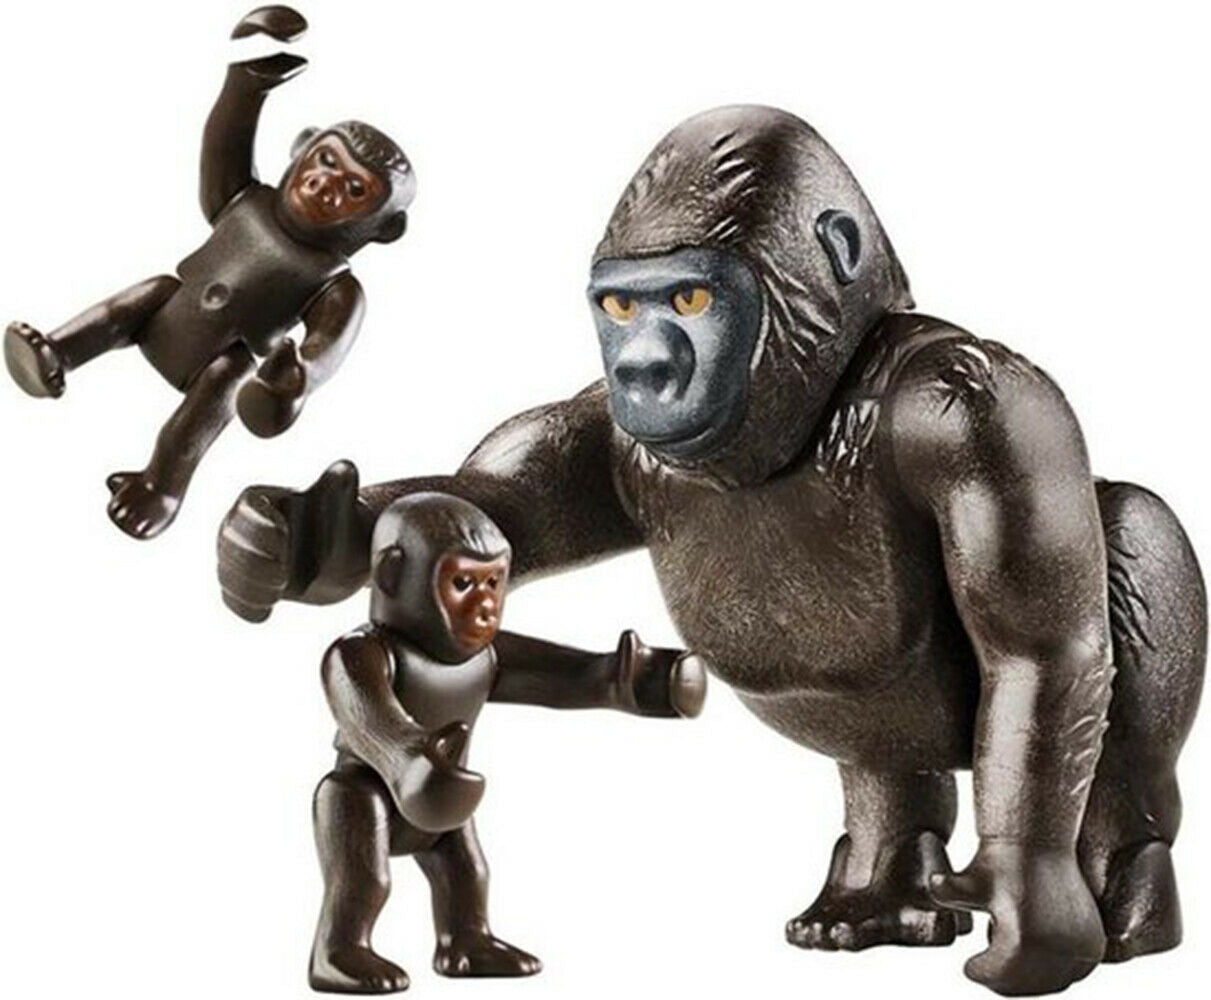 Gorilla with Babies by PLAYMOBIL #70360